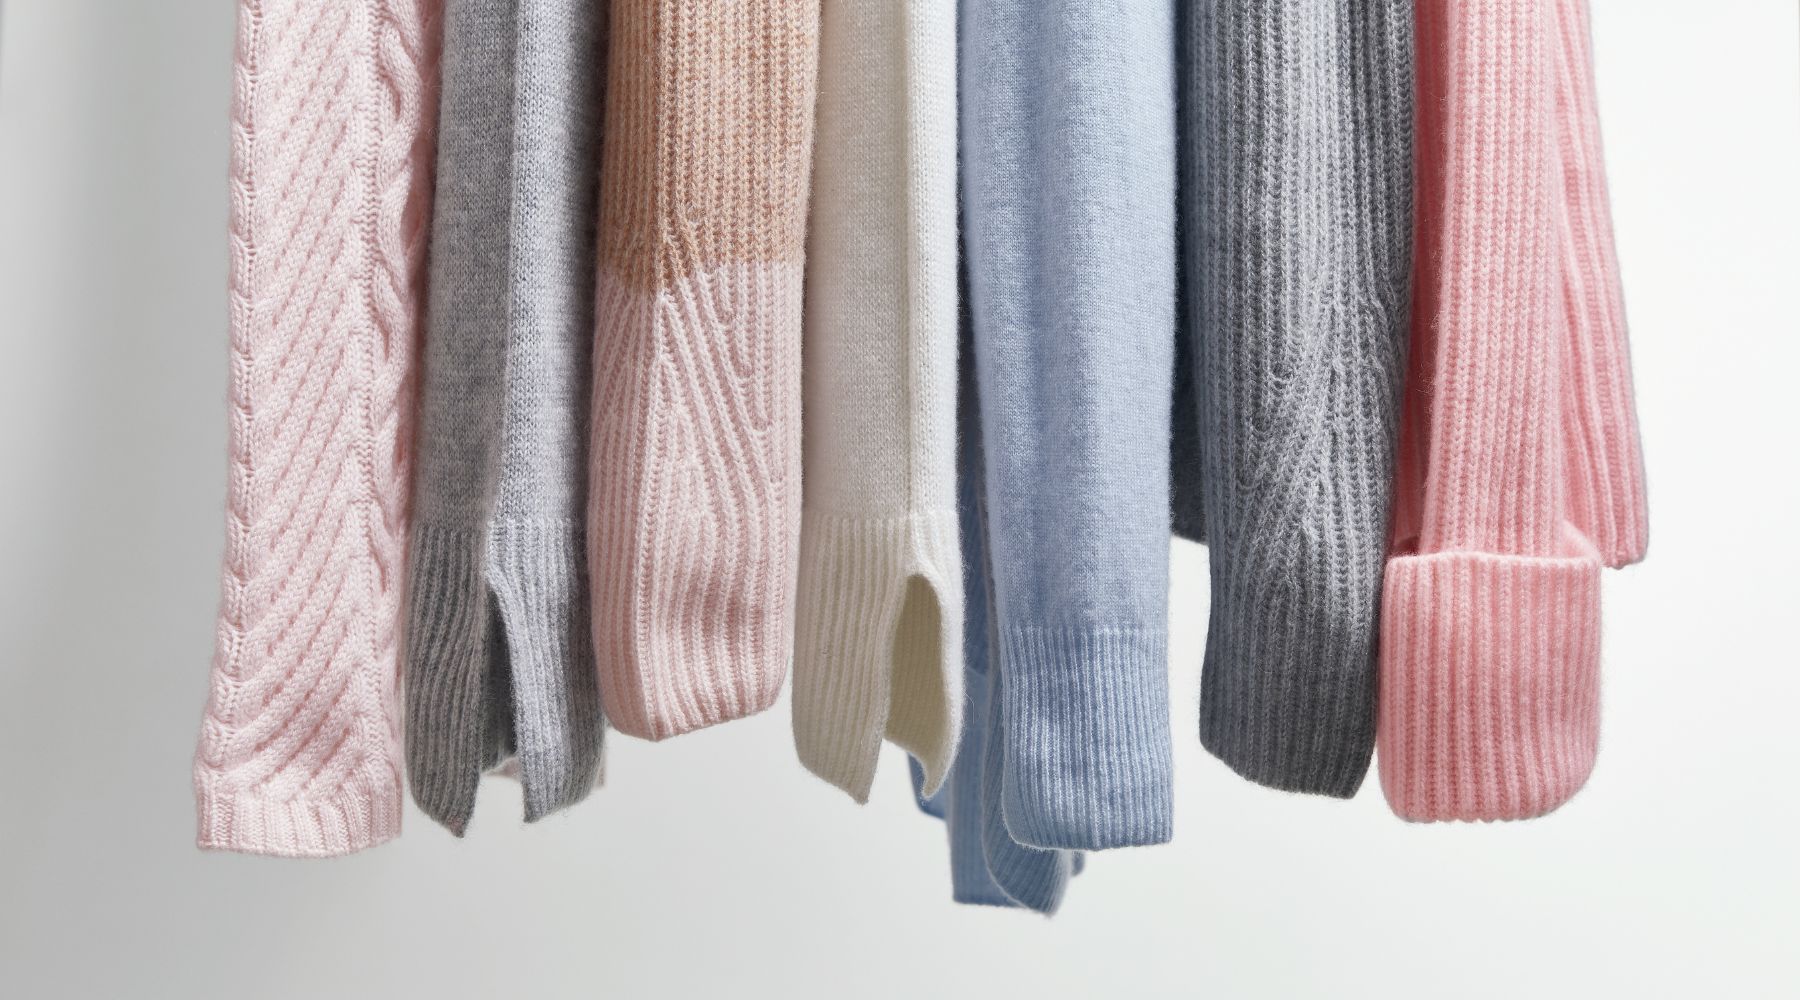 How Long Does Cashmere Last?